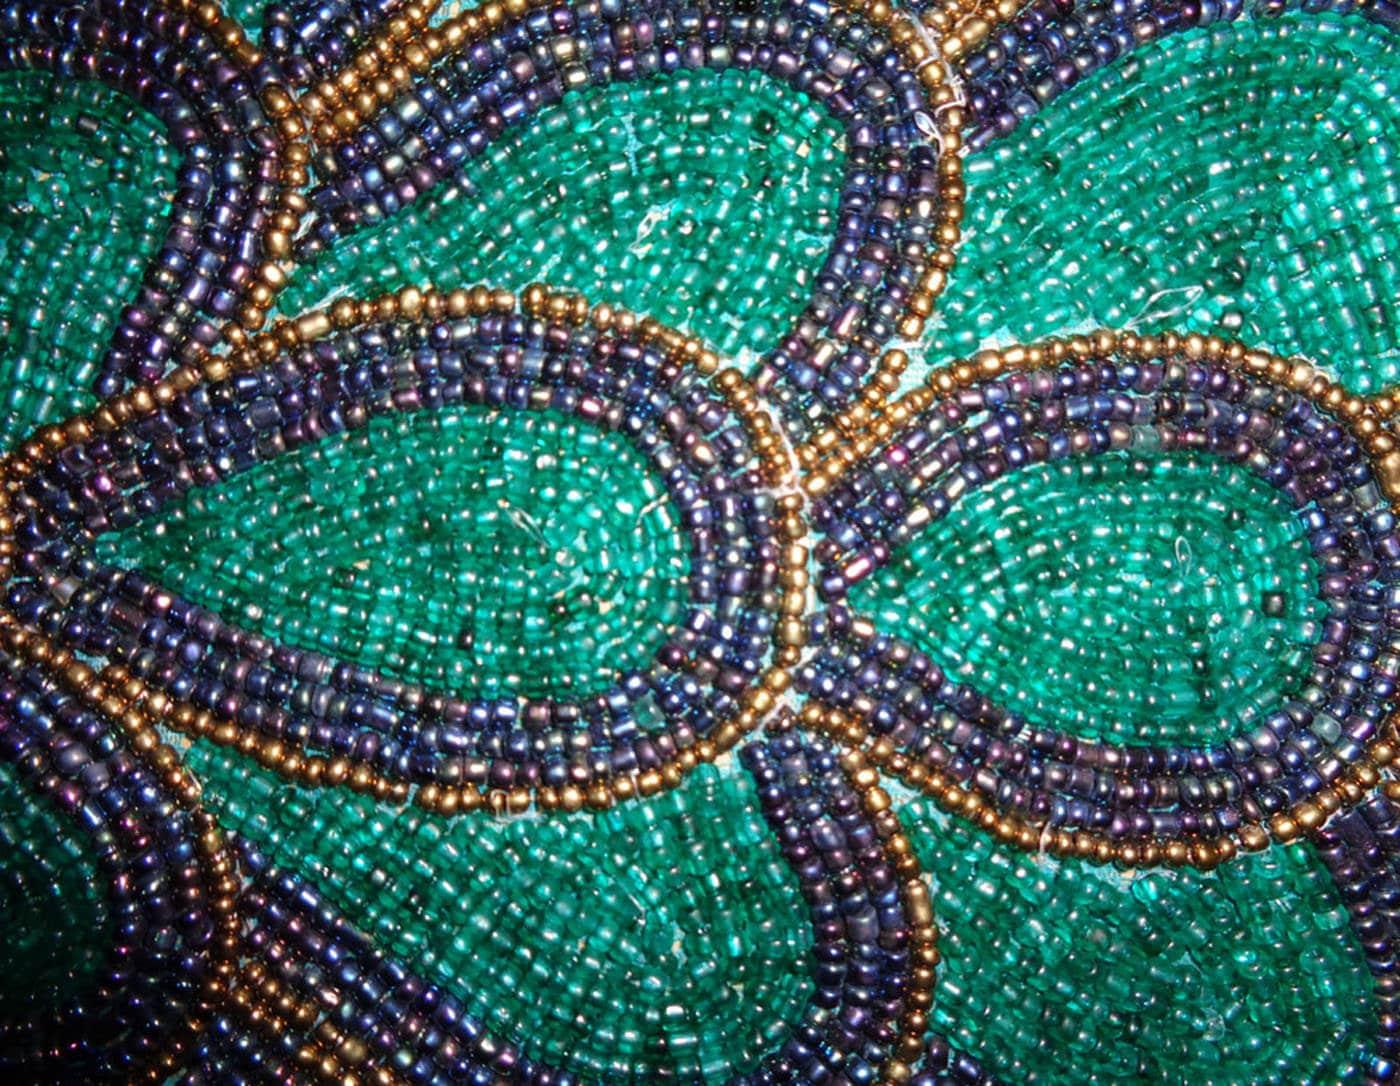 Peacock Wing Beaded Table Runner - Green and Blue - MAIA HOMES